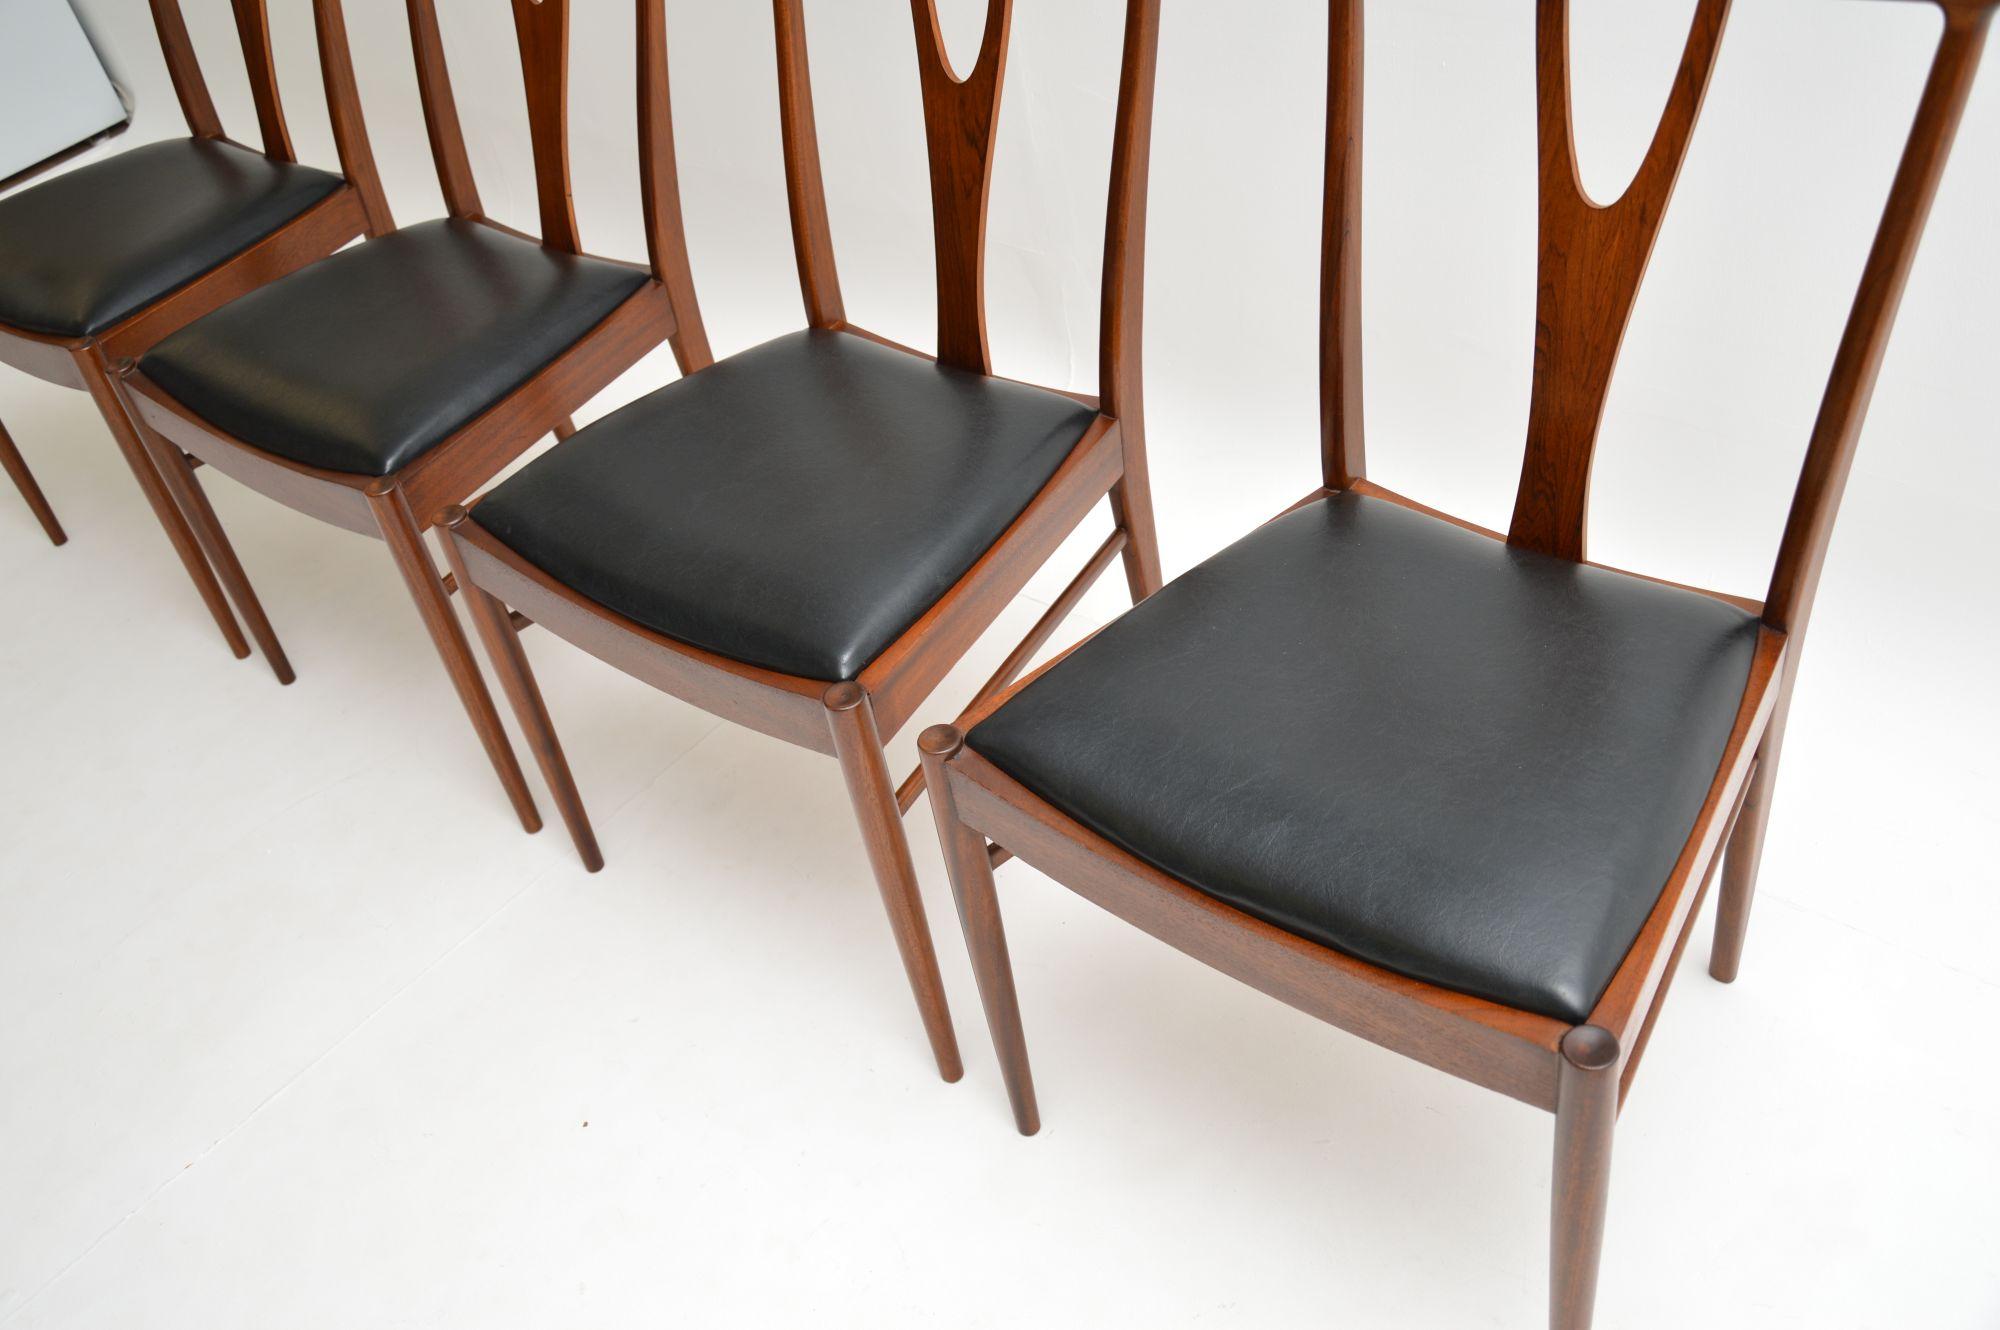 Wood Set of 4 Vintage Dining Chairs in Afromosia